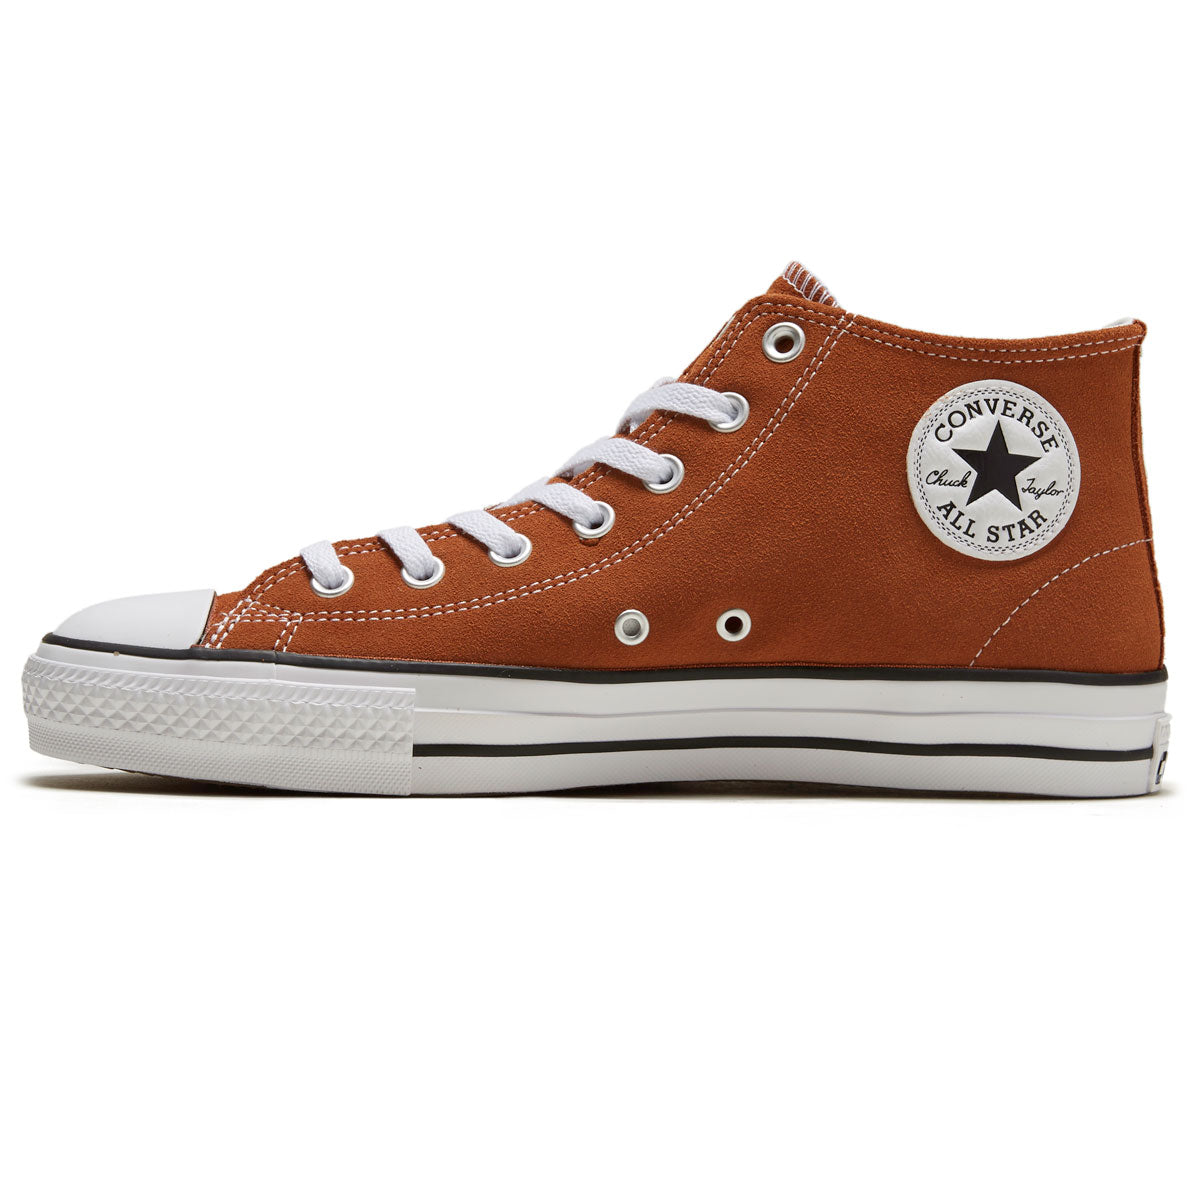 Converse Chuck Taylor All Pro Mid Shoes - Tawny Owl/White/Black – CCS